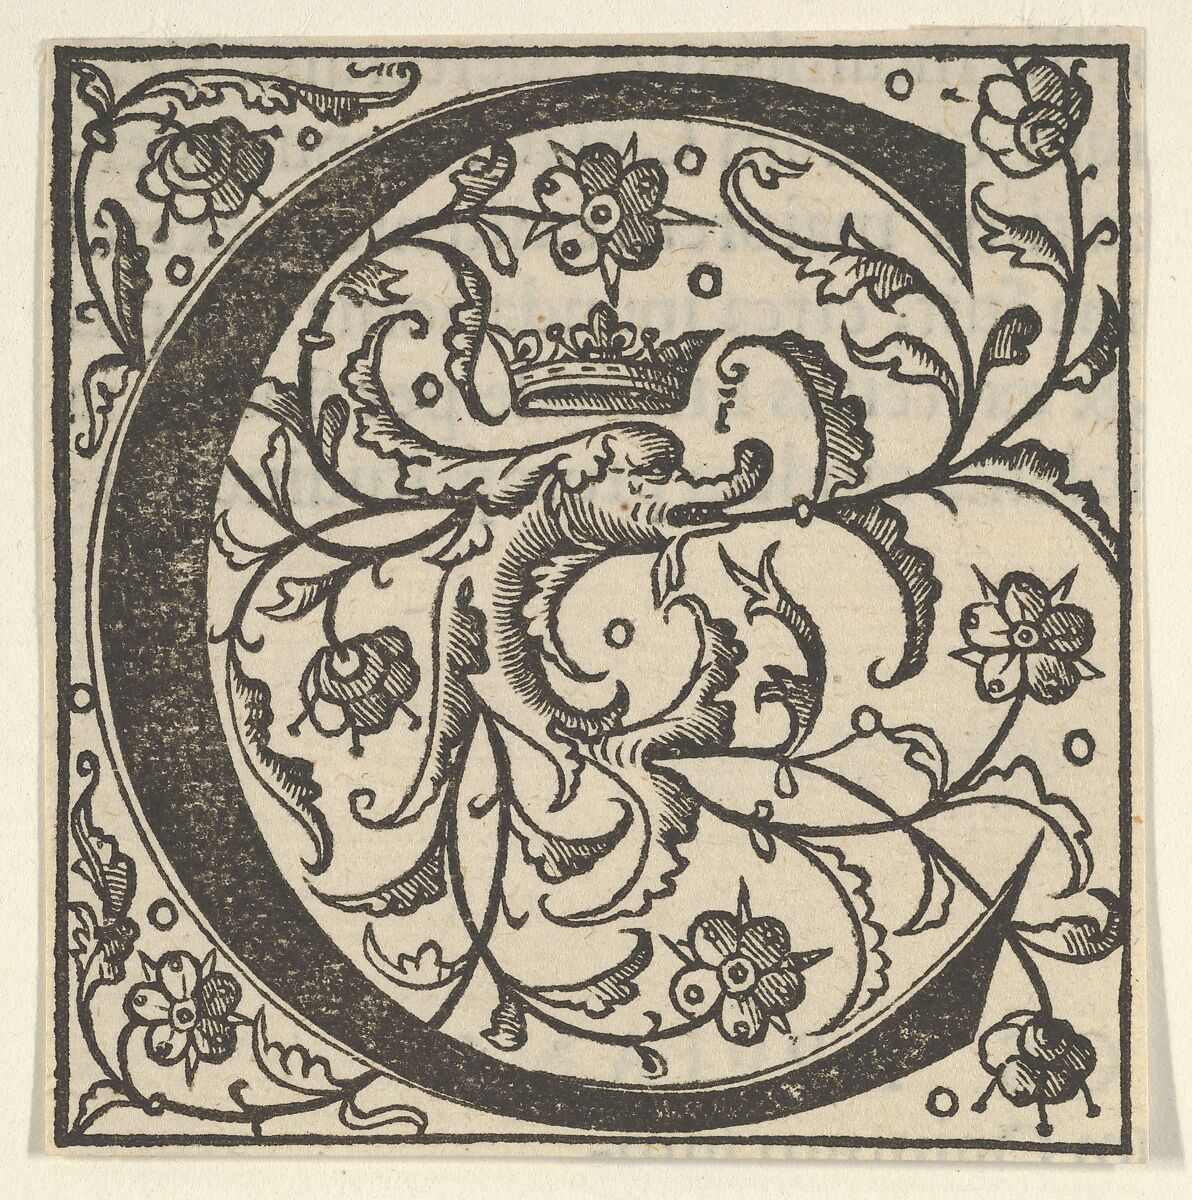 Initial letter C with dolphin and crown | The Metropolitan Museum of Art